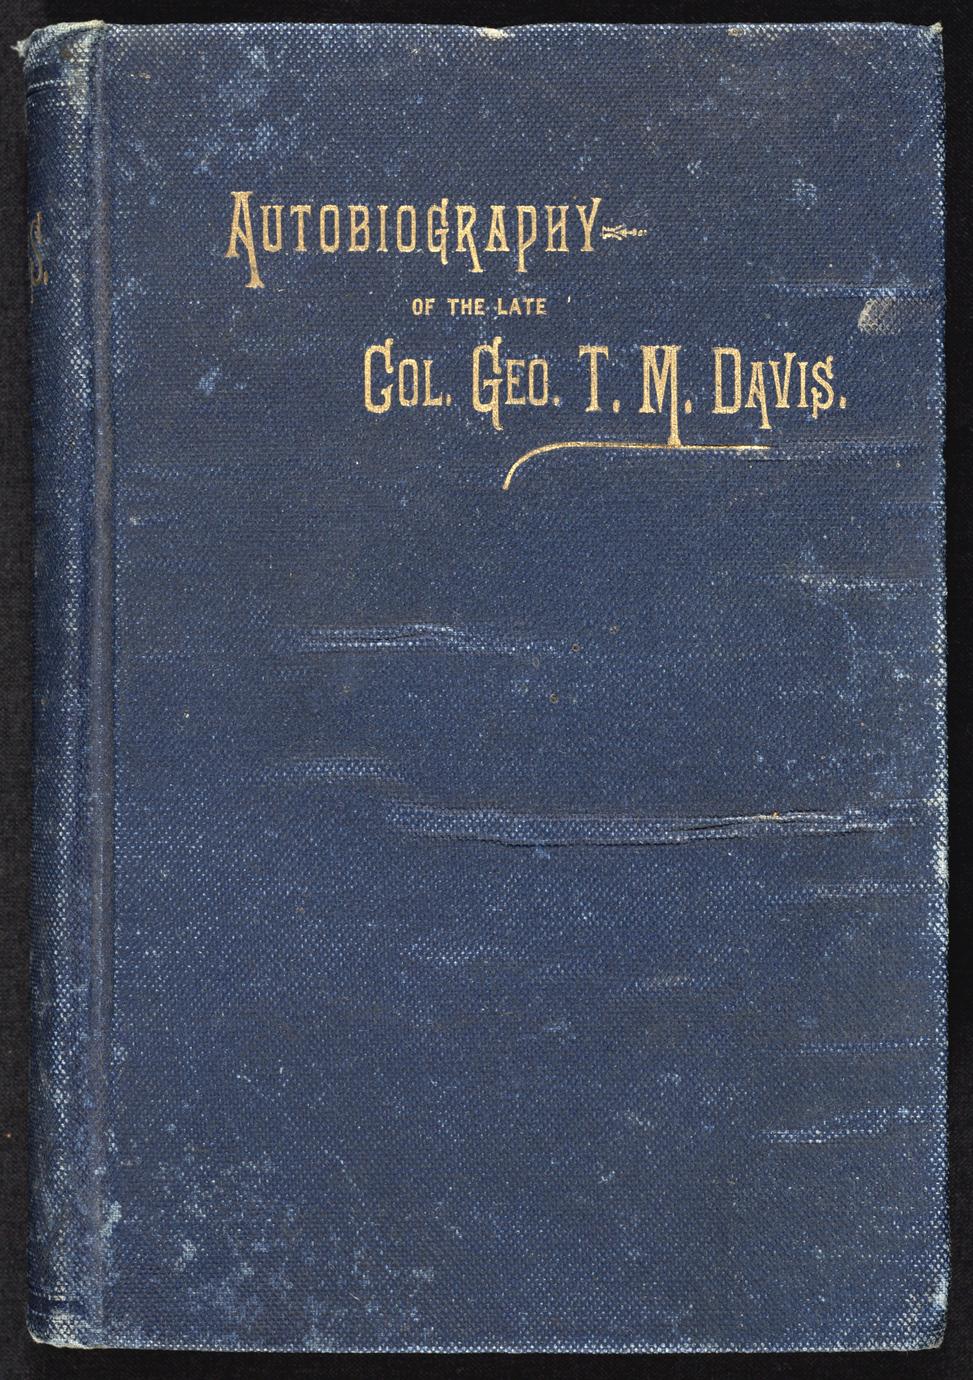 Autobiography of the late Col. Geo. T.M. Davis : captain and aid-de-camp Scott's army of invasion (Mexico), from posthumous papers (1 of 2)